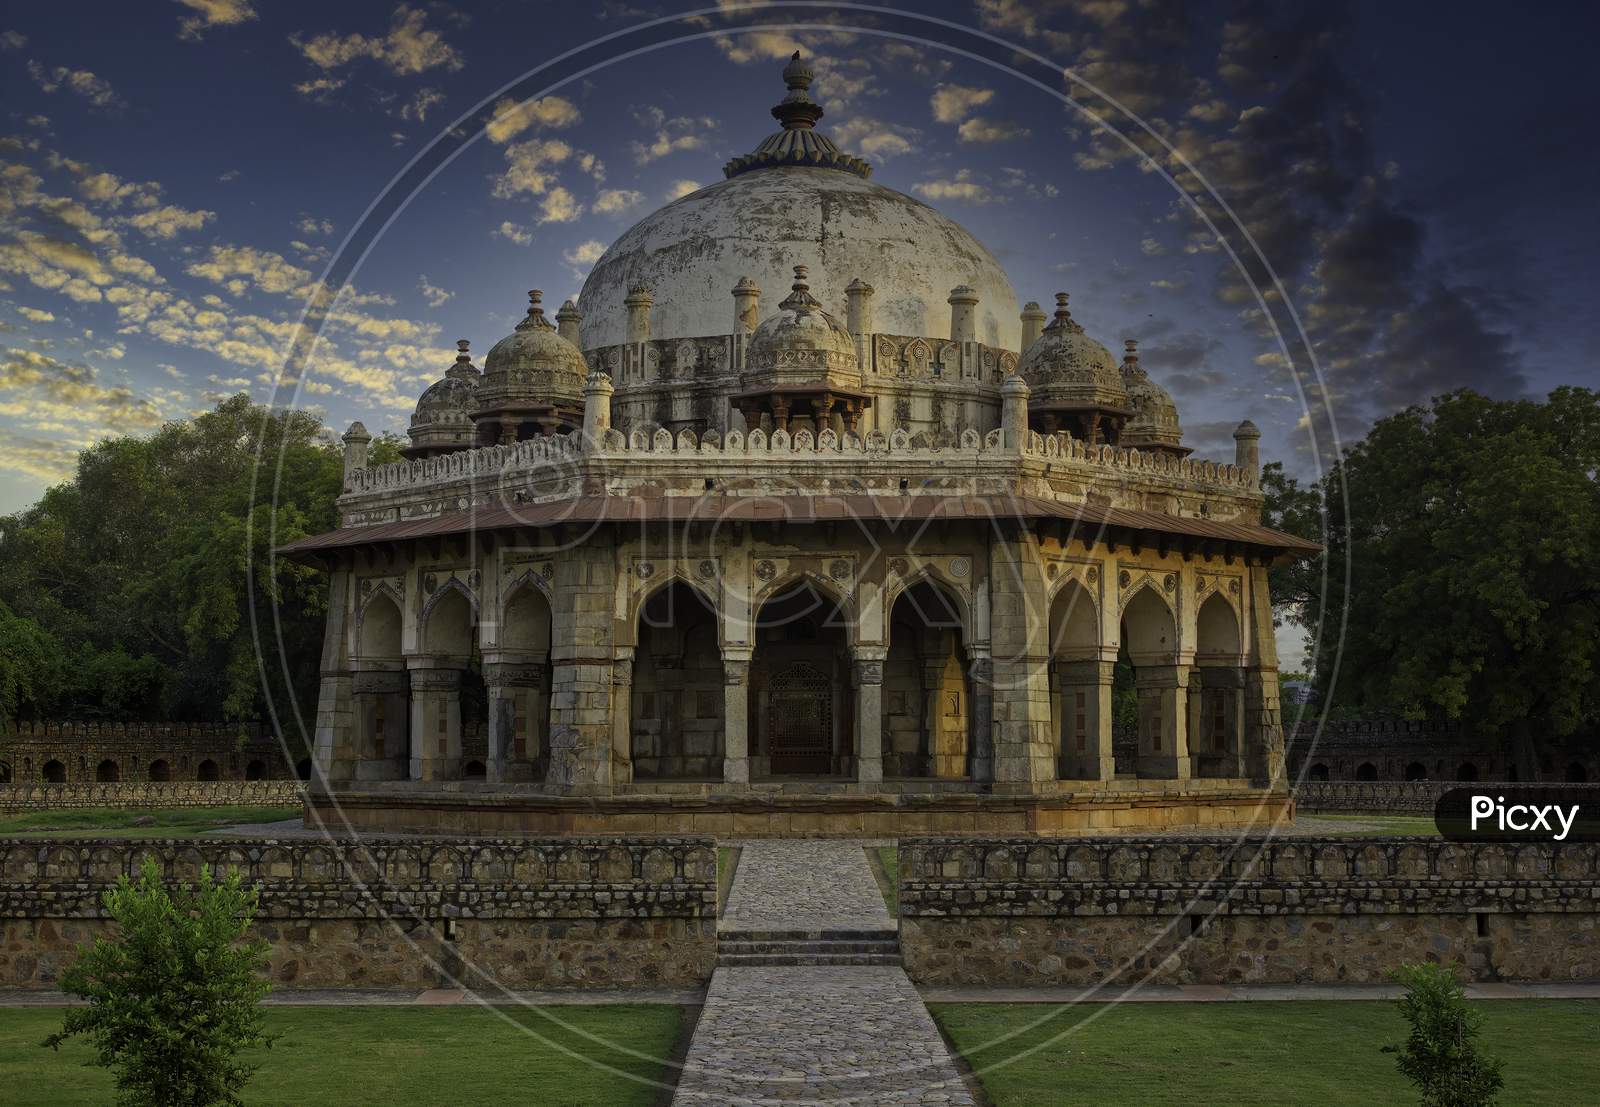 Islamic Architecture Tomb In Lodhi Garden Against Dramatic Sunset Located In New Delhi, India